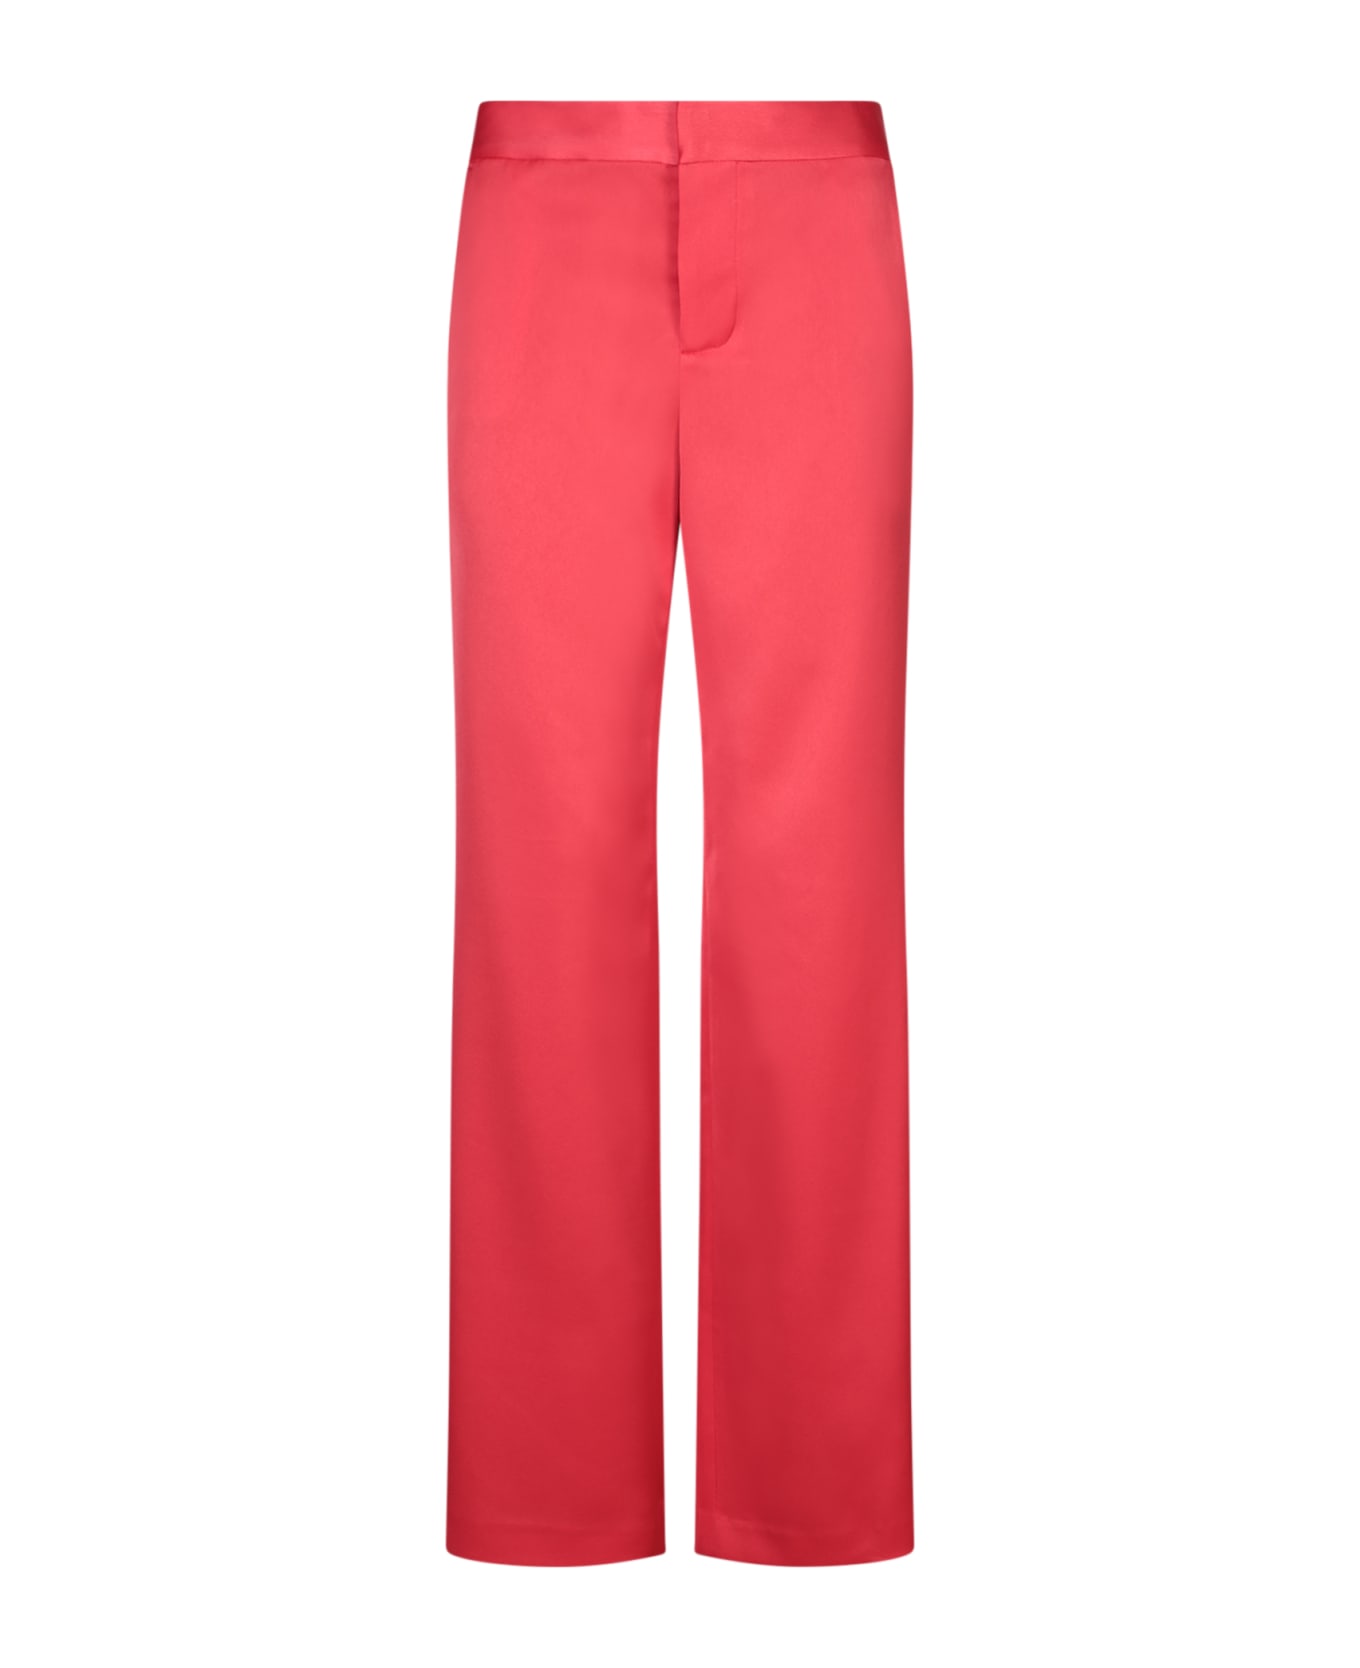 Alice + Olivia Red Satin Wide Leg Trousers - Red ボトムス